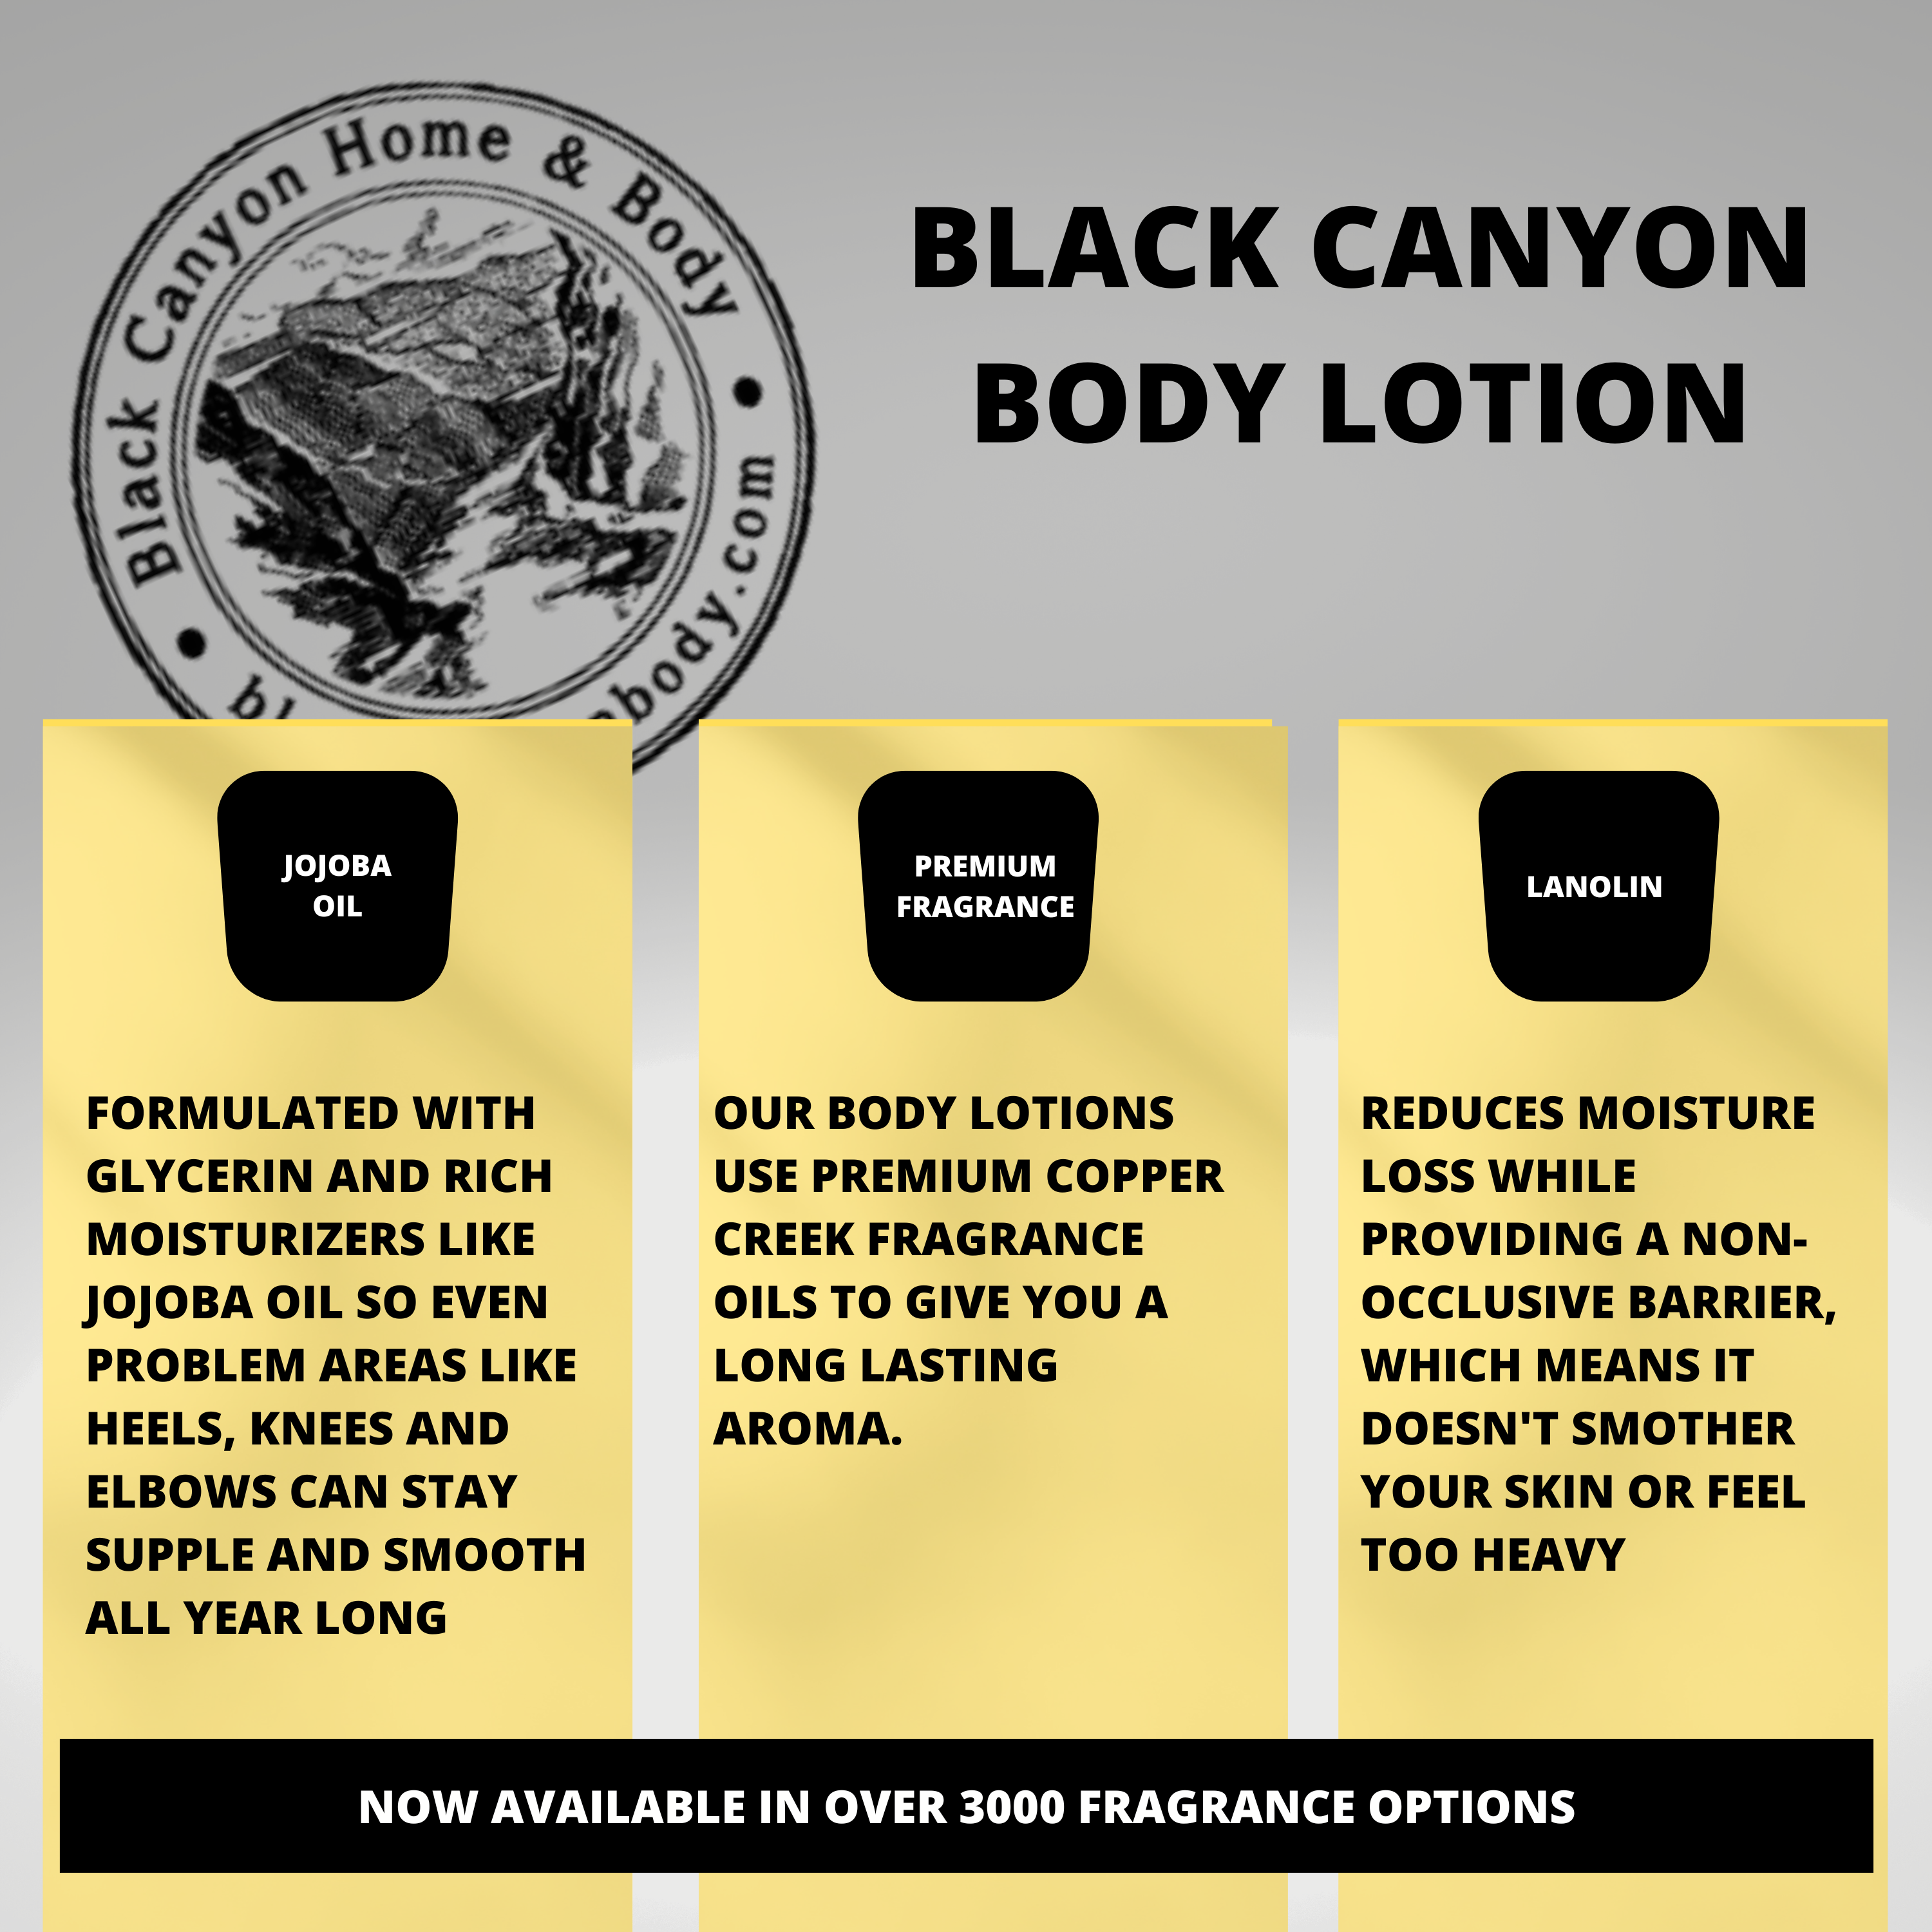 Black Canyon Blackberry & Fir Scented Luxury Body Lotion with Lanolin and Jojoba Oil